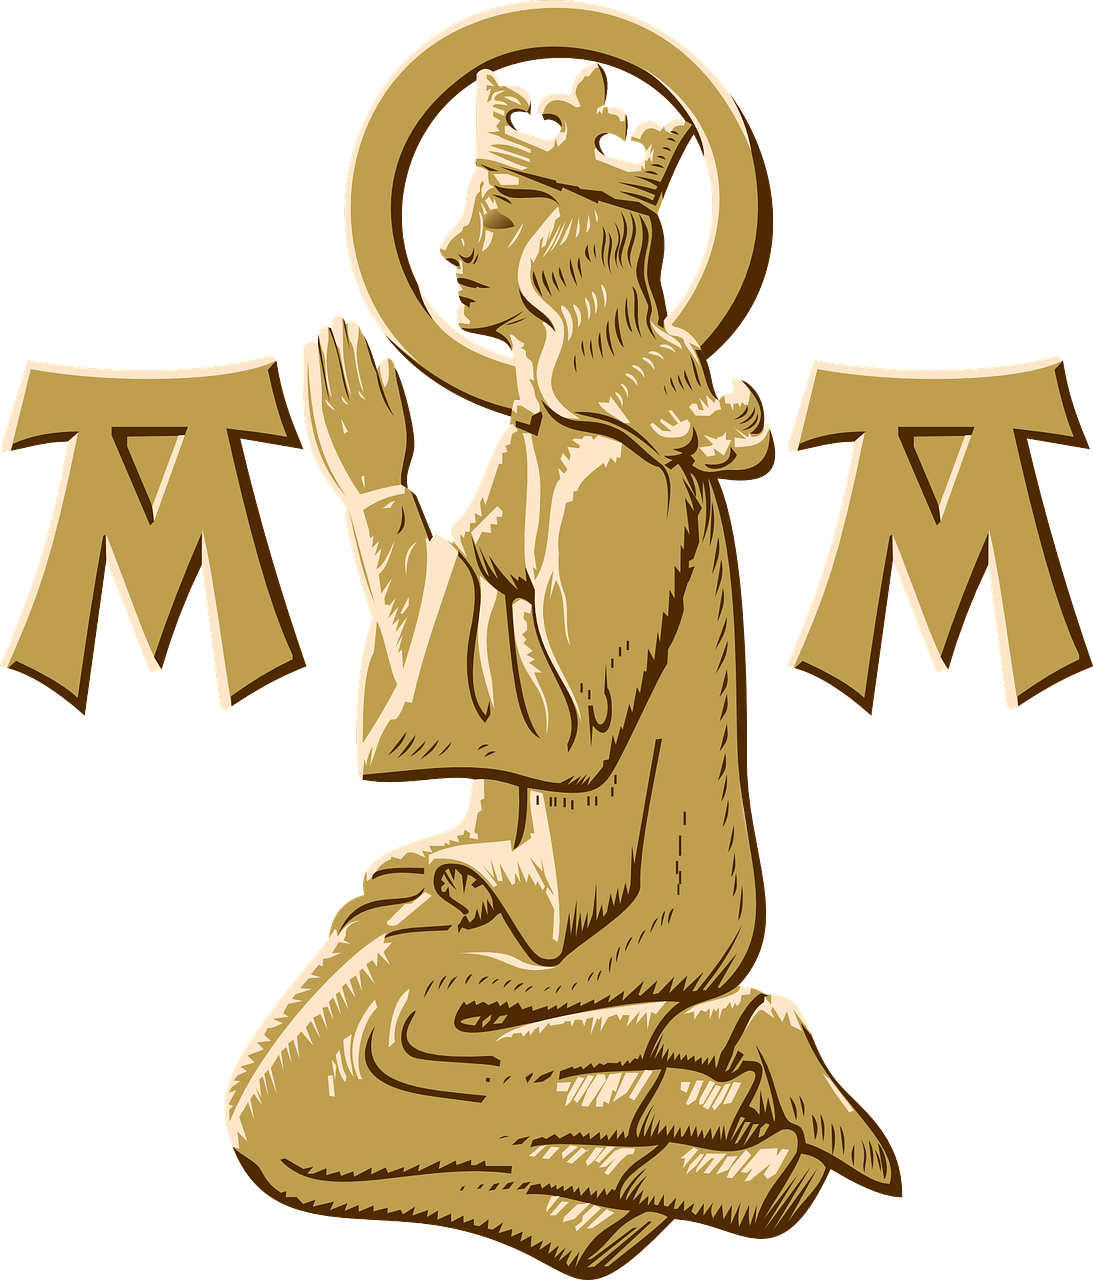 mary,praying,asking,religion,christianity,pray,god,christian,virgin,saint,free vector graphics,free pictures, free photos, free images, royalty free, free illustrations, public domain